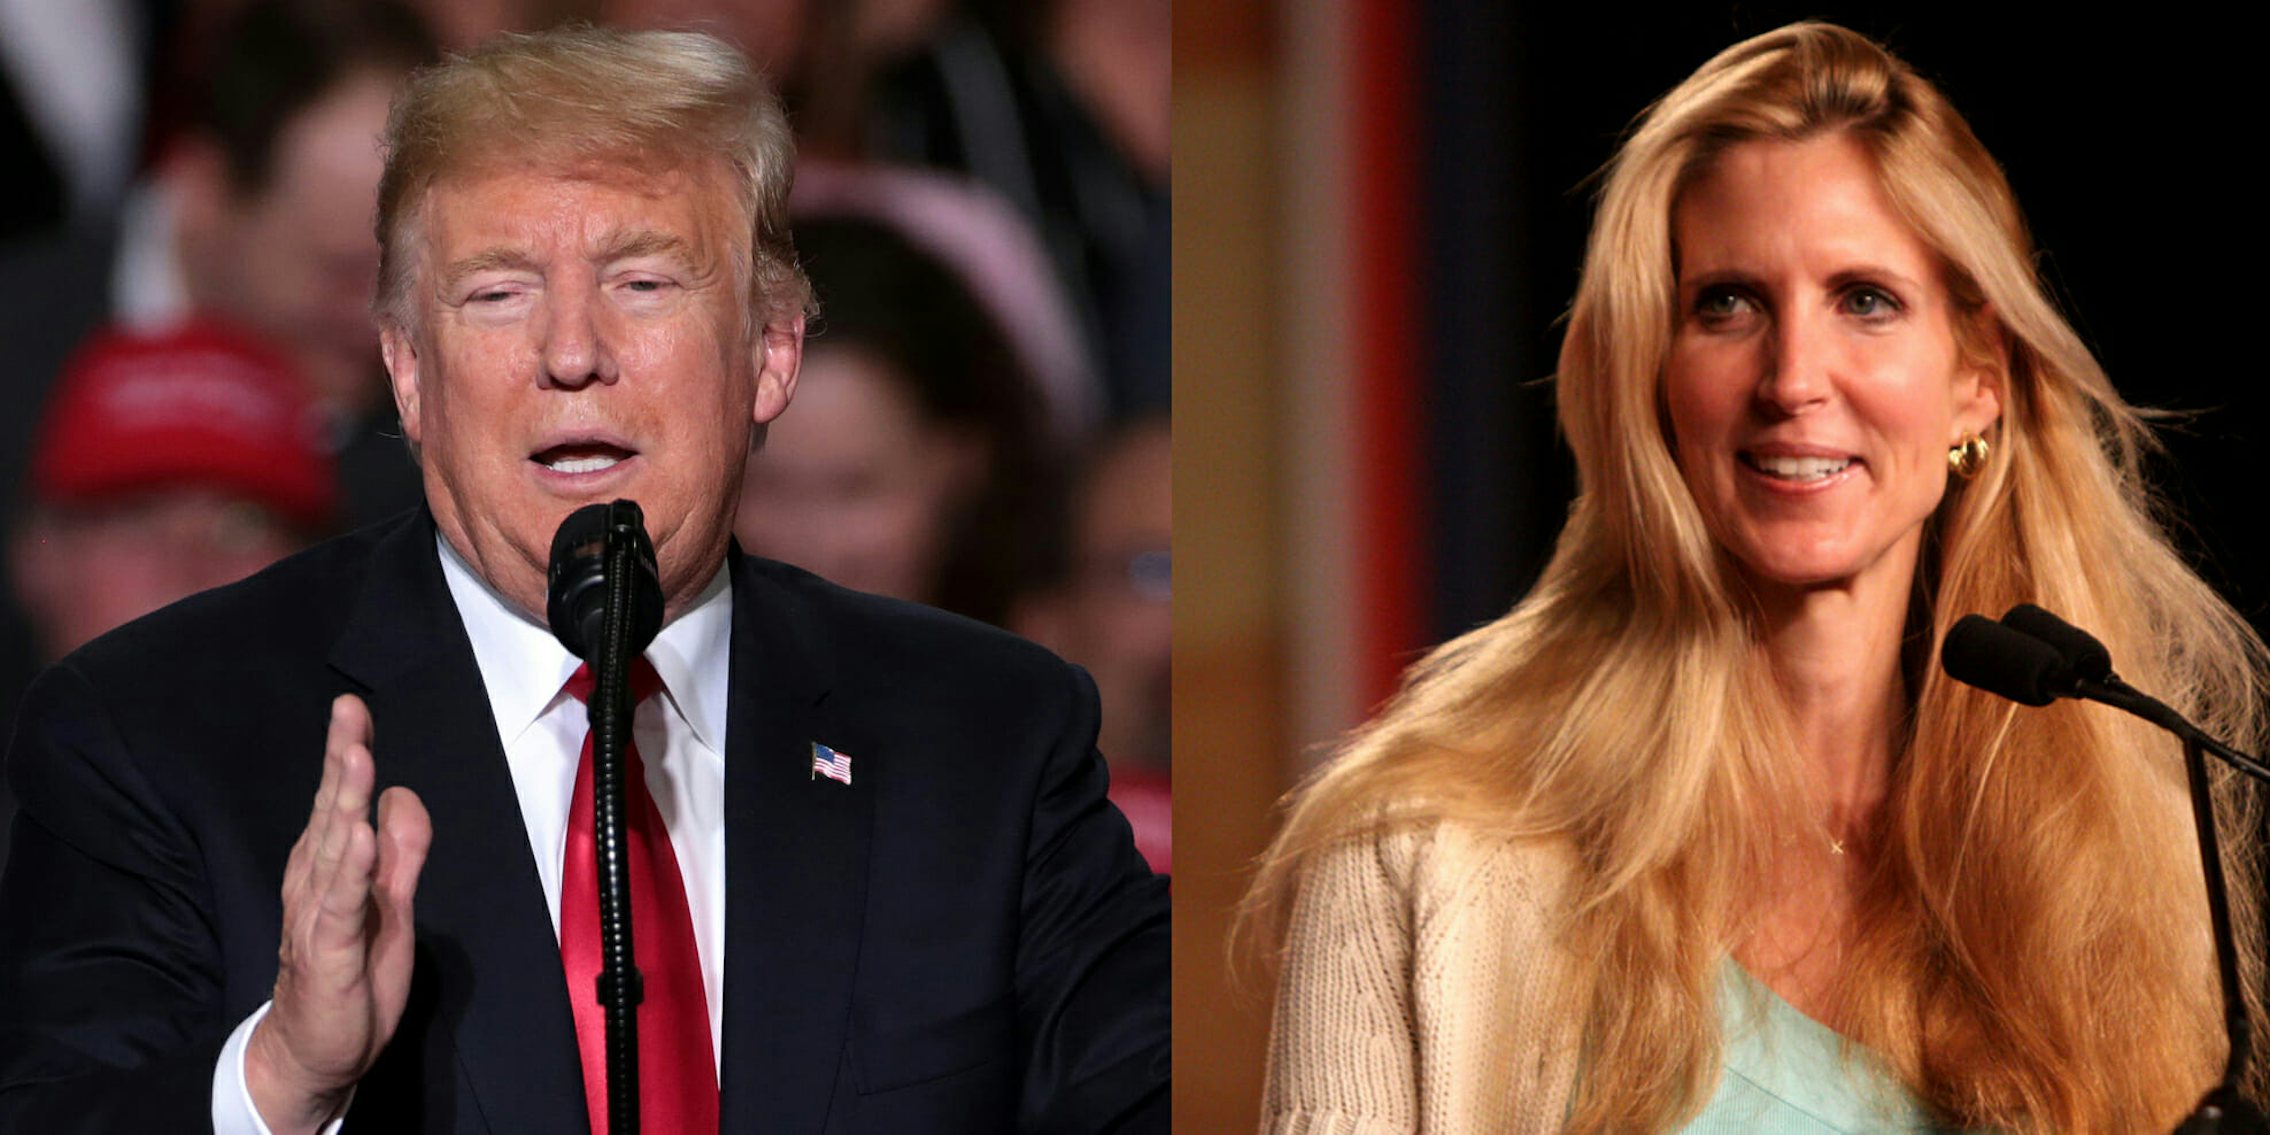 President Donald Trump no longer follows right-wing pundit Ann Coulter on Twitter, just hours after she called him 'gutless' over his border wall.